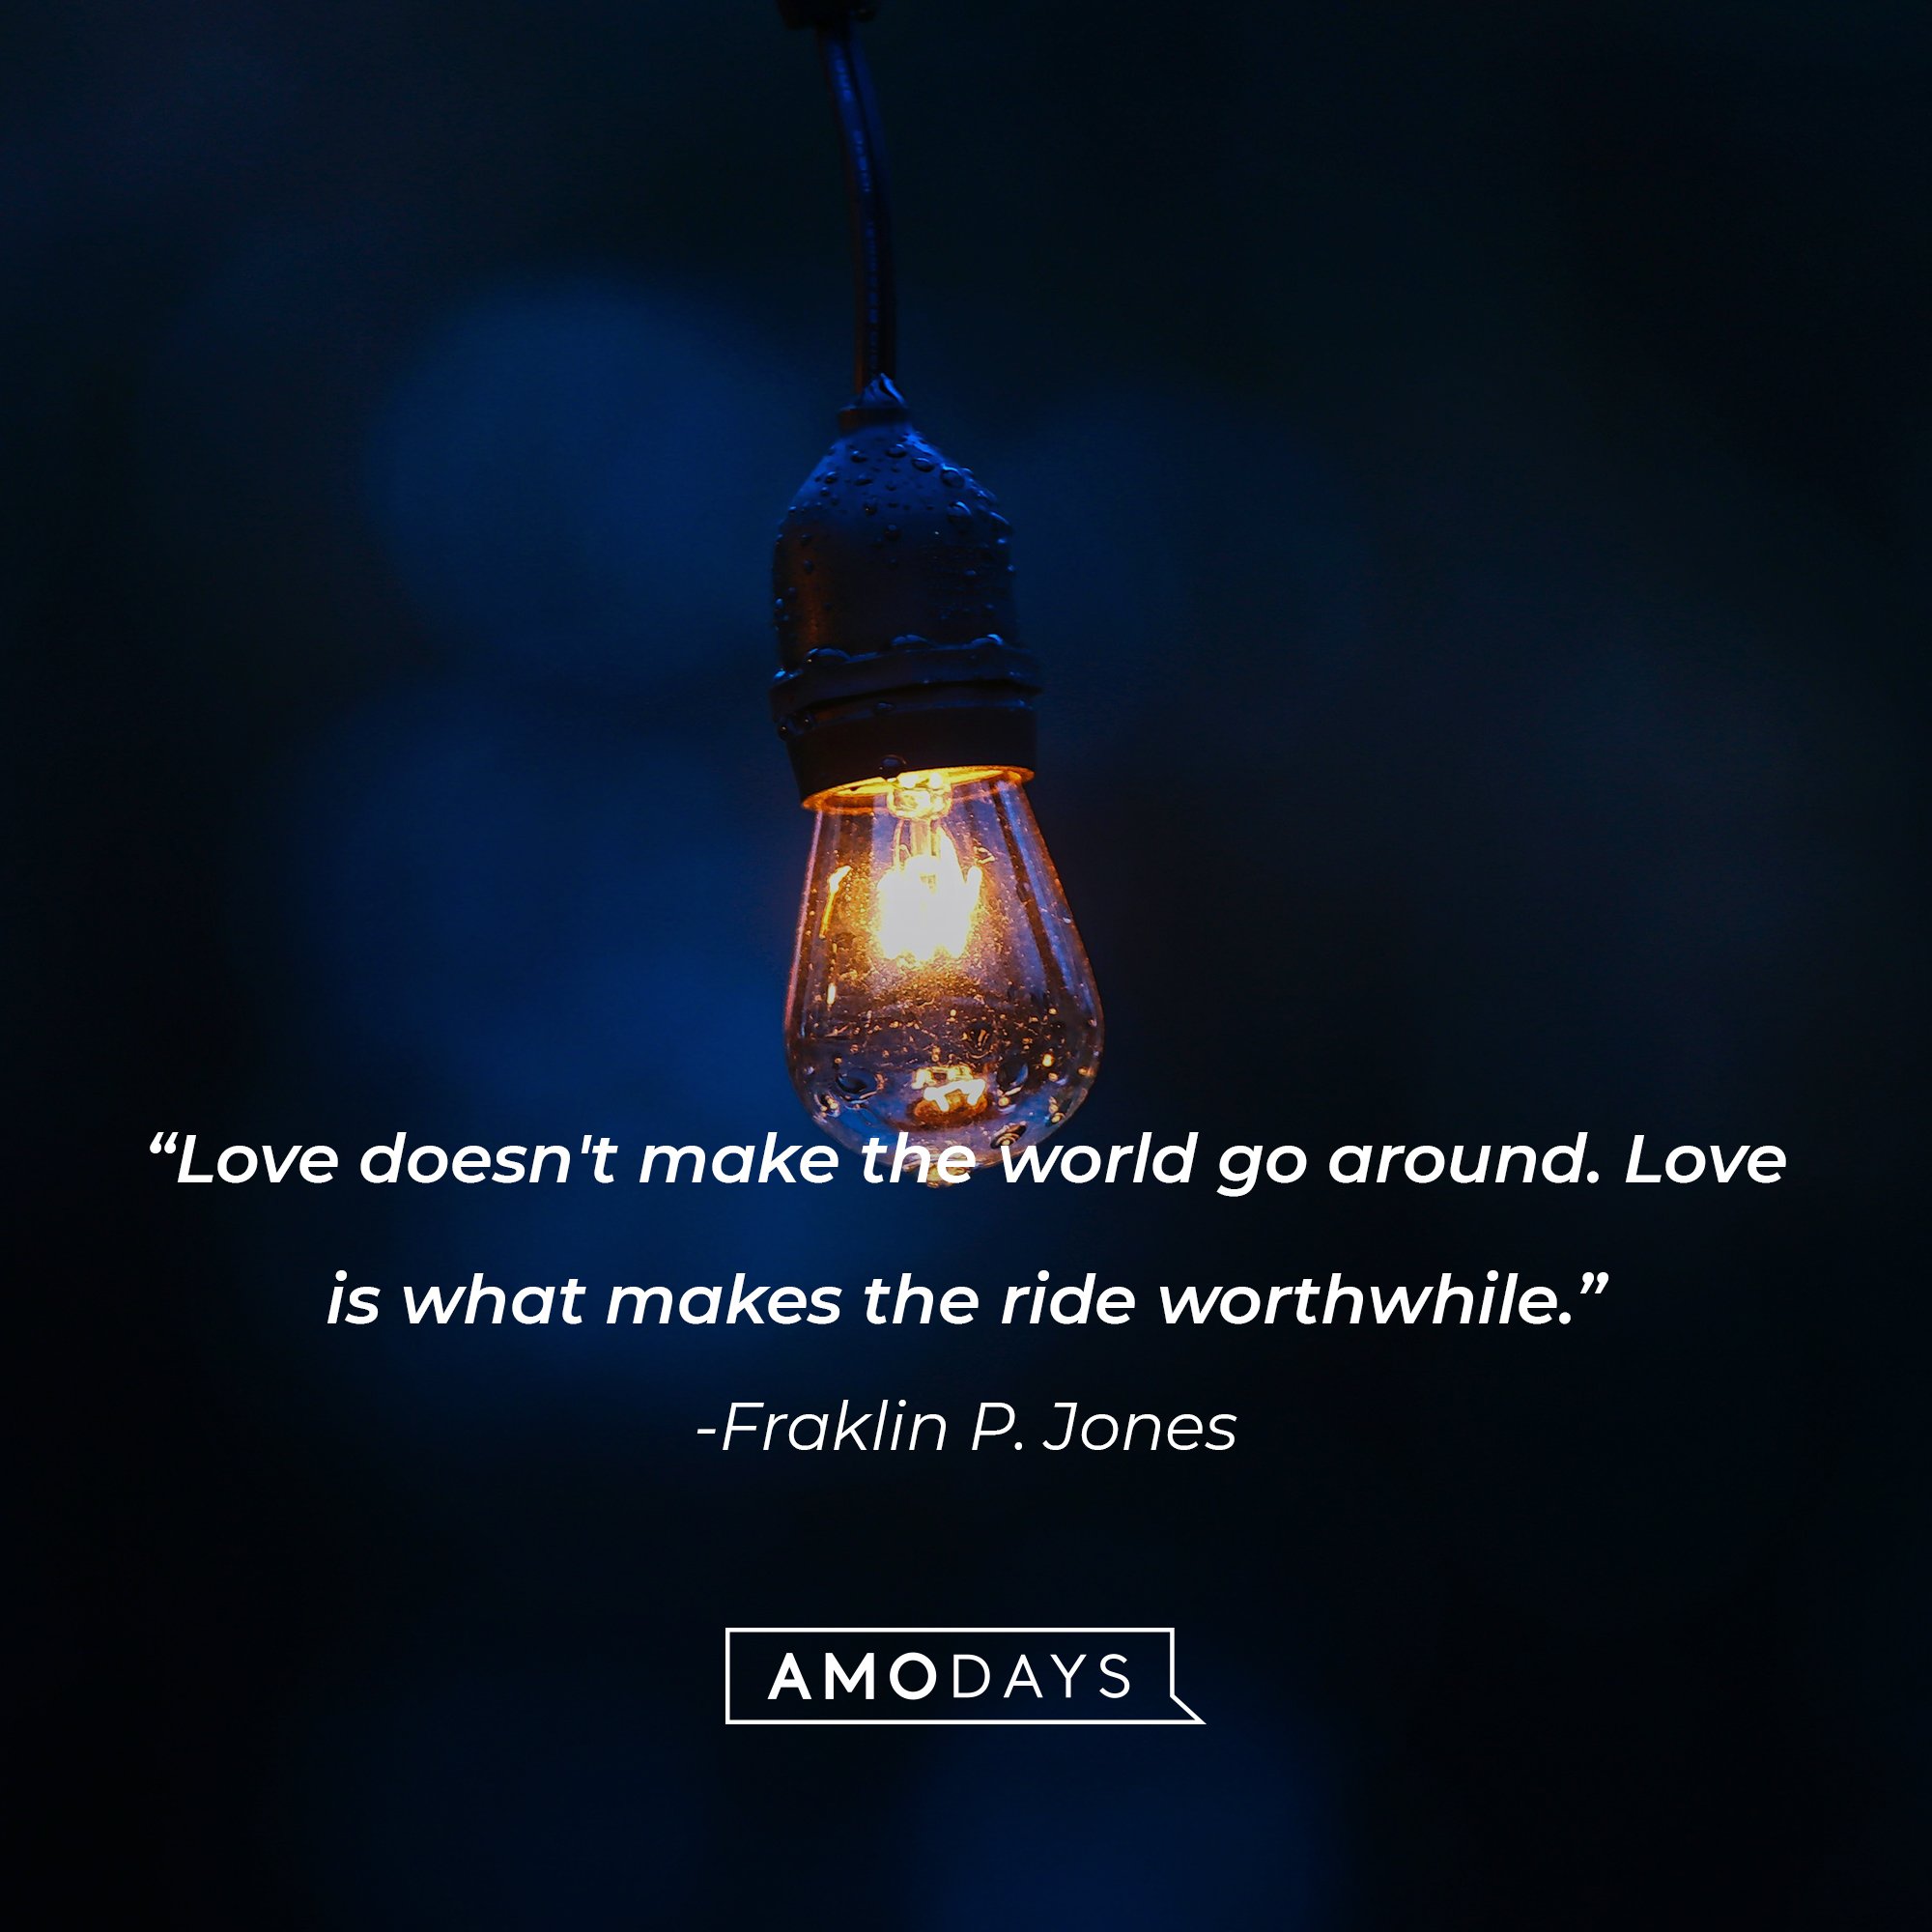 Fraklin P. Jones's quote: "Love doesn't make the world go around. Love is what makes the ride worthwhile." | Image: AmoDays